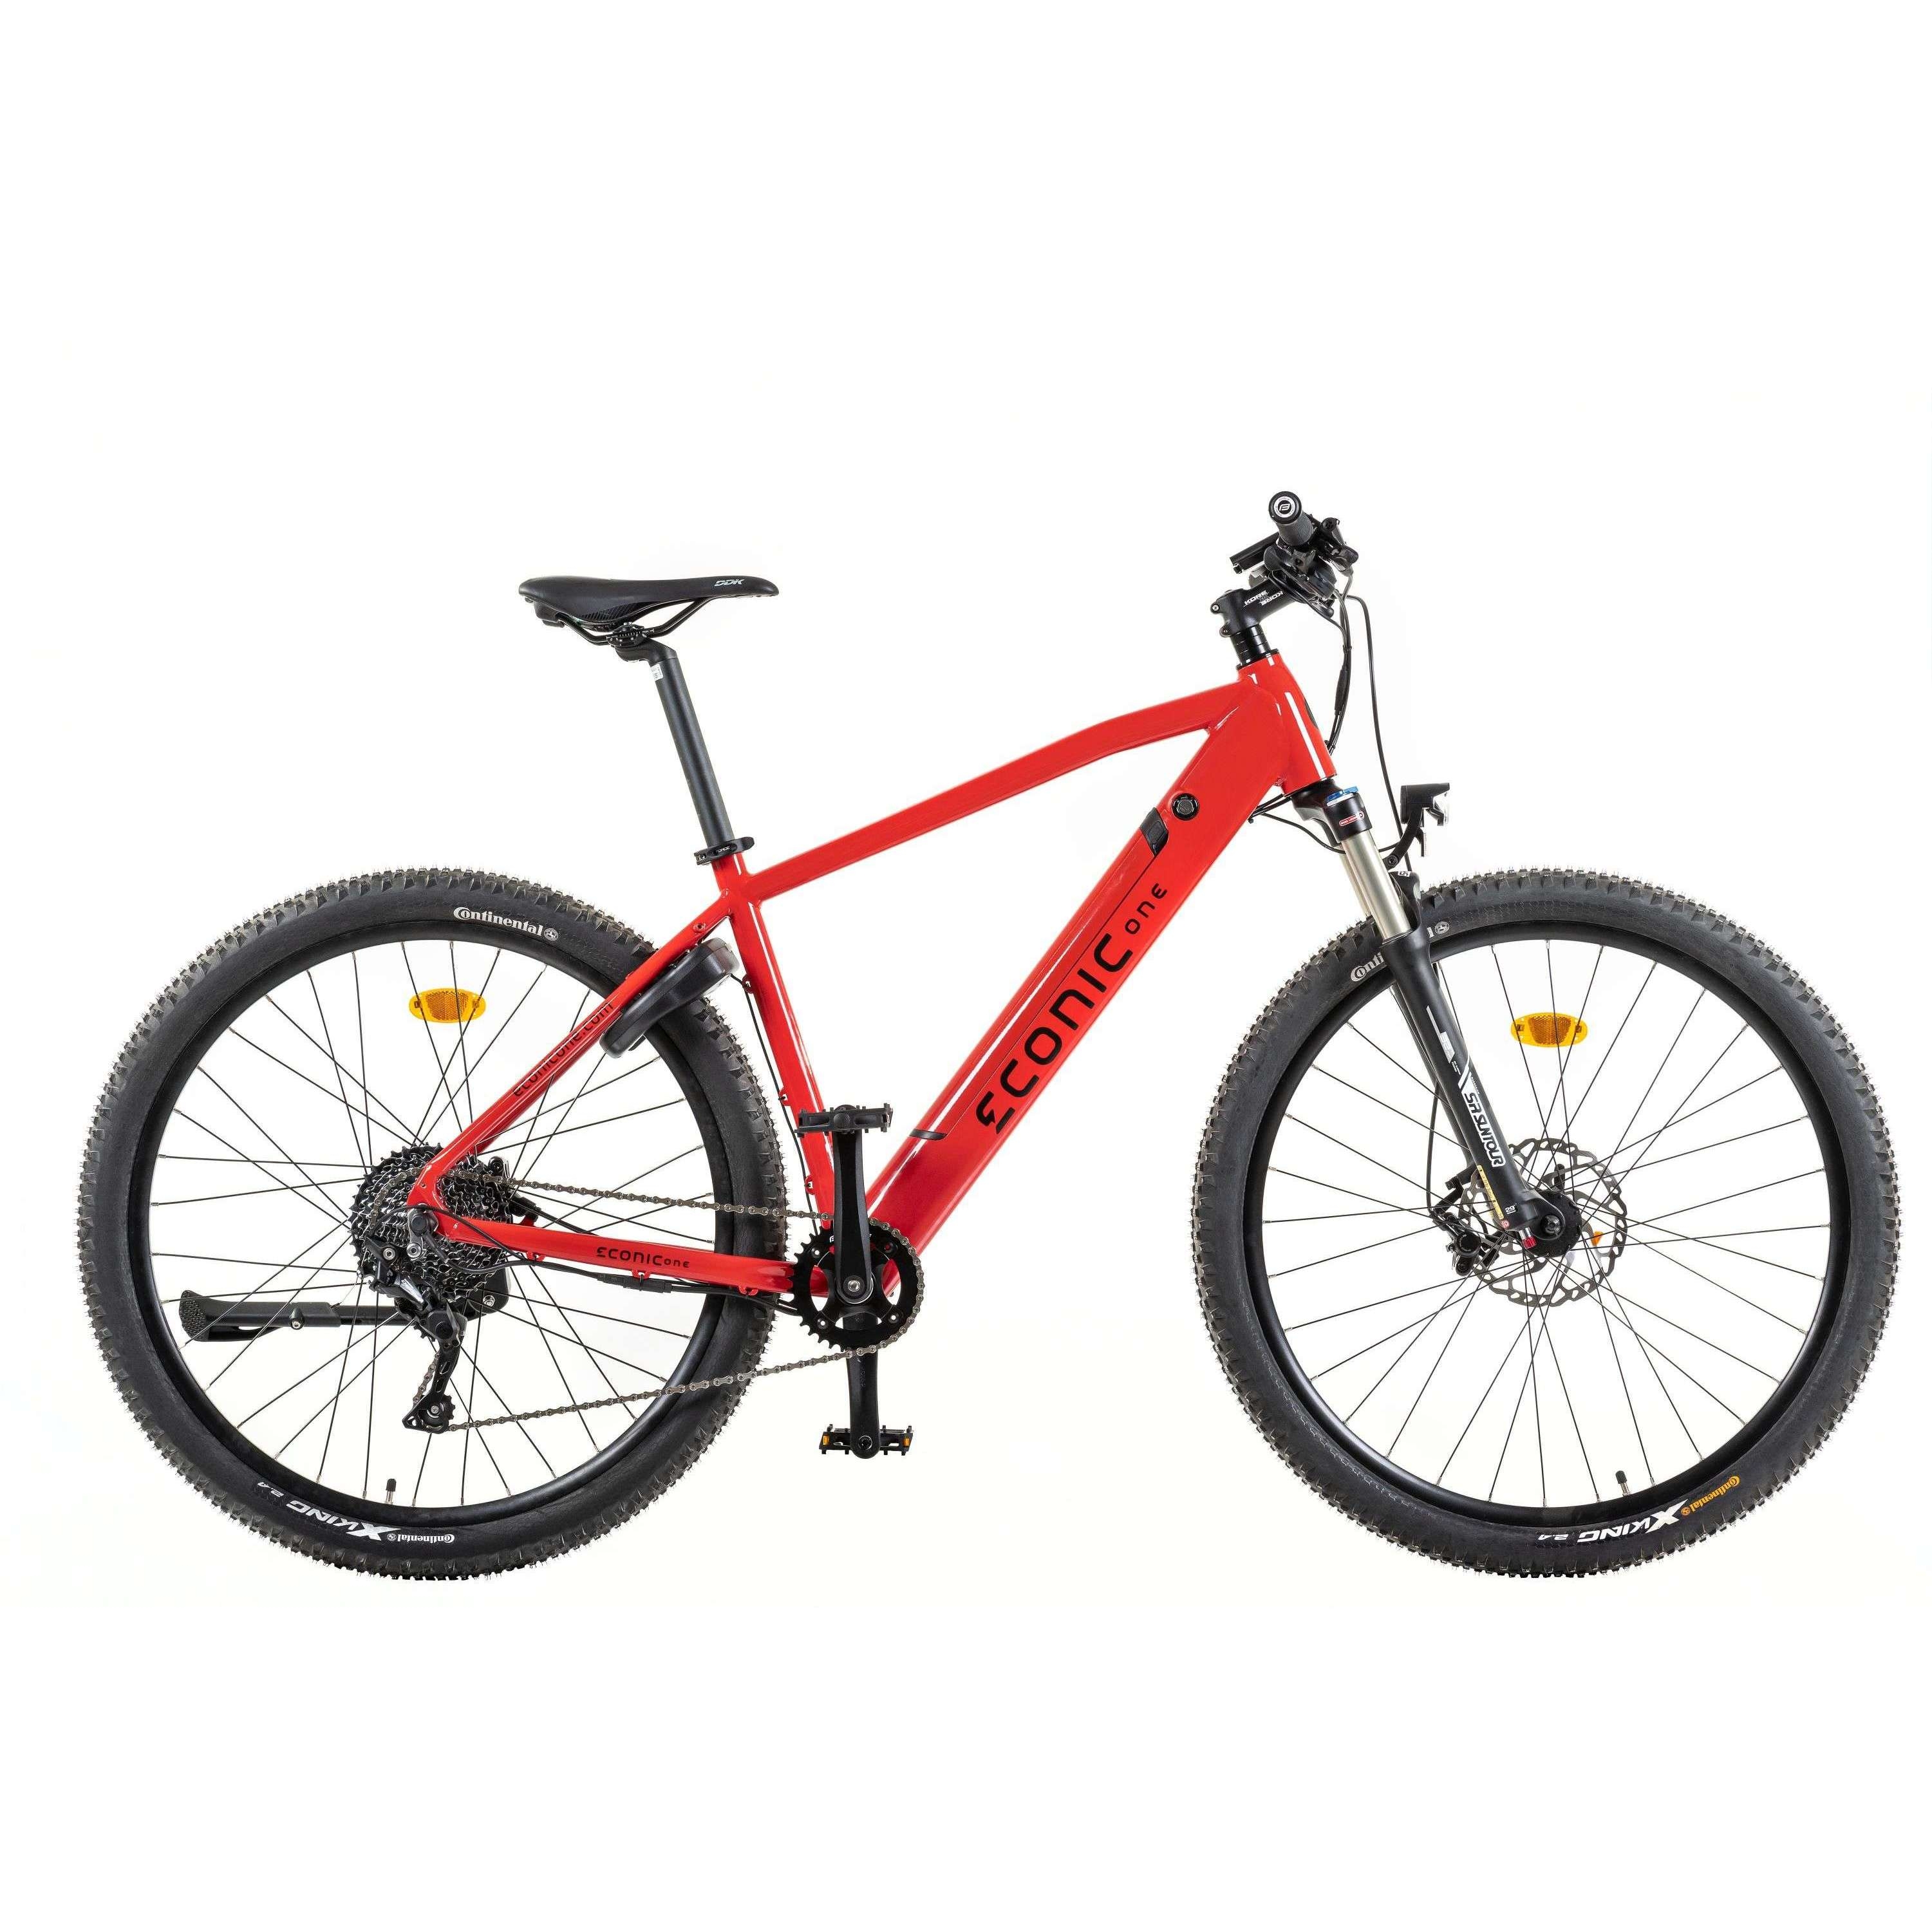 Econic One Smart Cross Country E-MTB 250W, Red / 52cm – Urban Travel